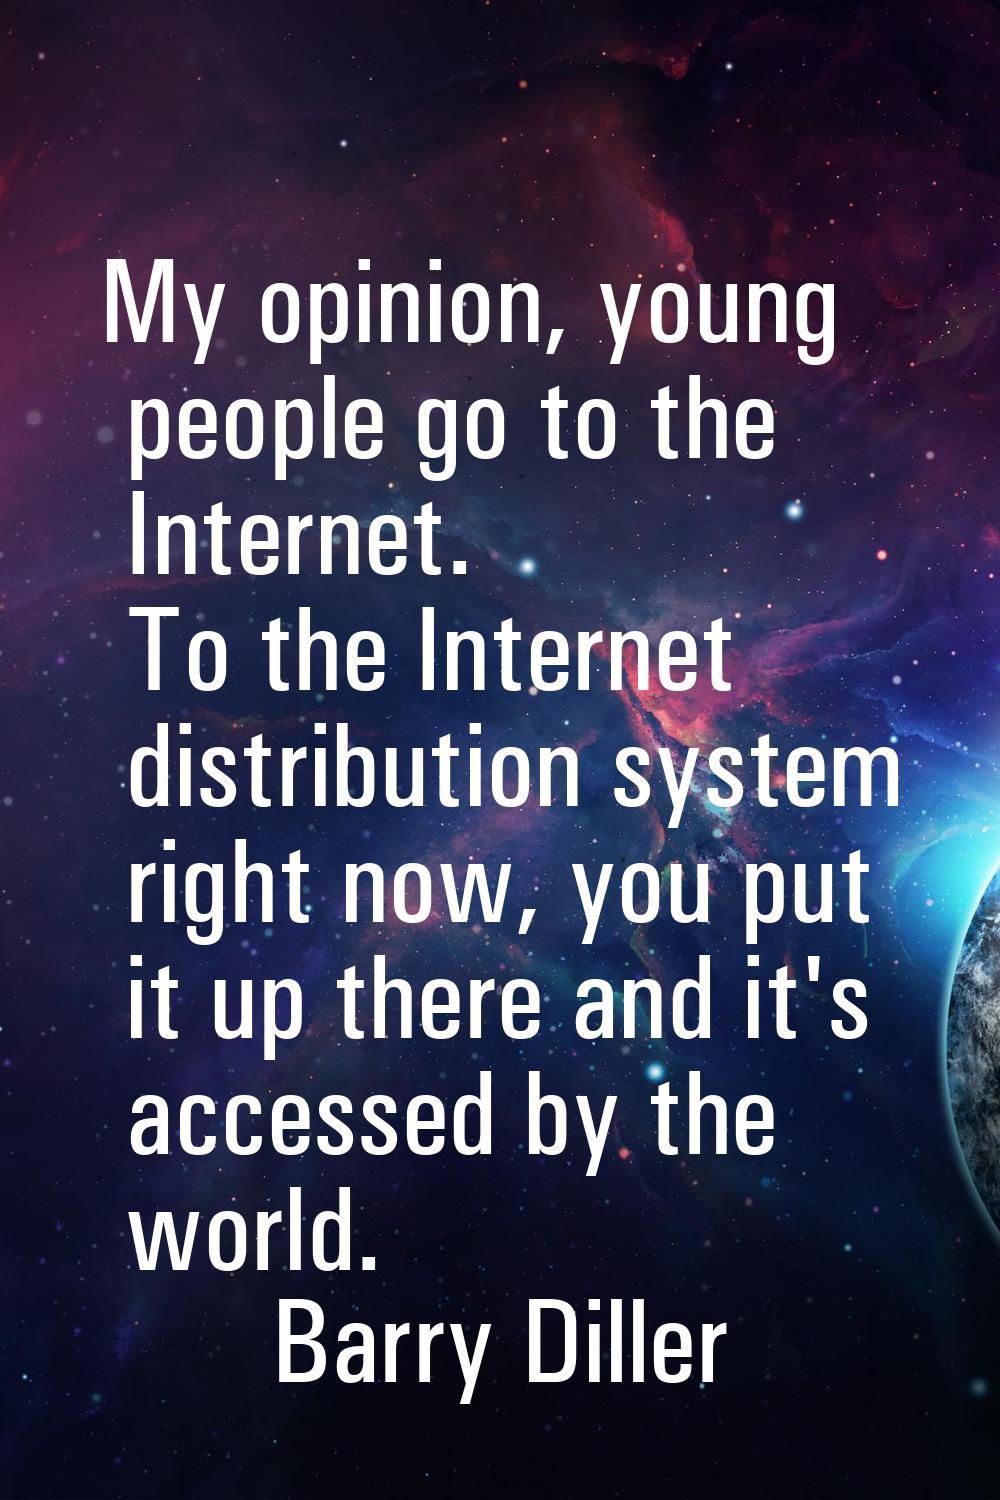 My opinion, young people go to the Internet. To the Internet distribution system right now, you put